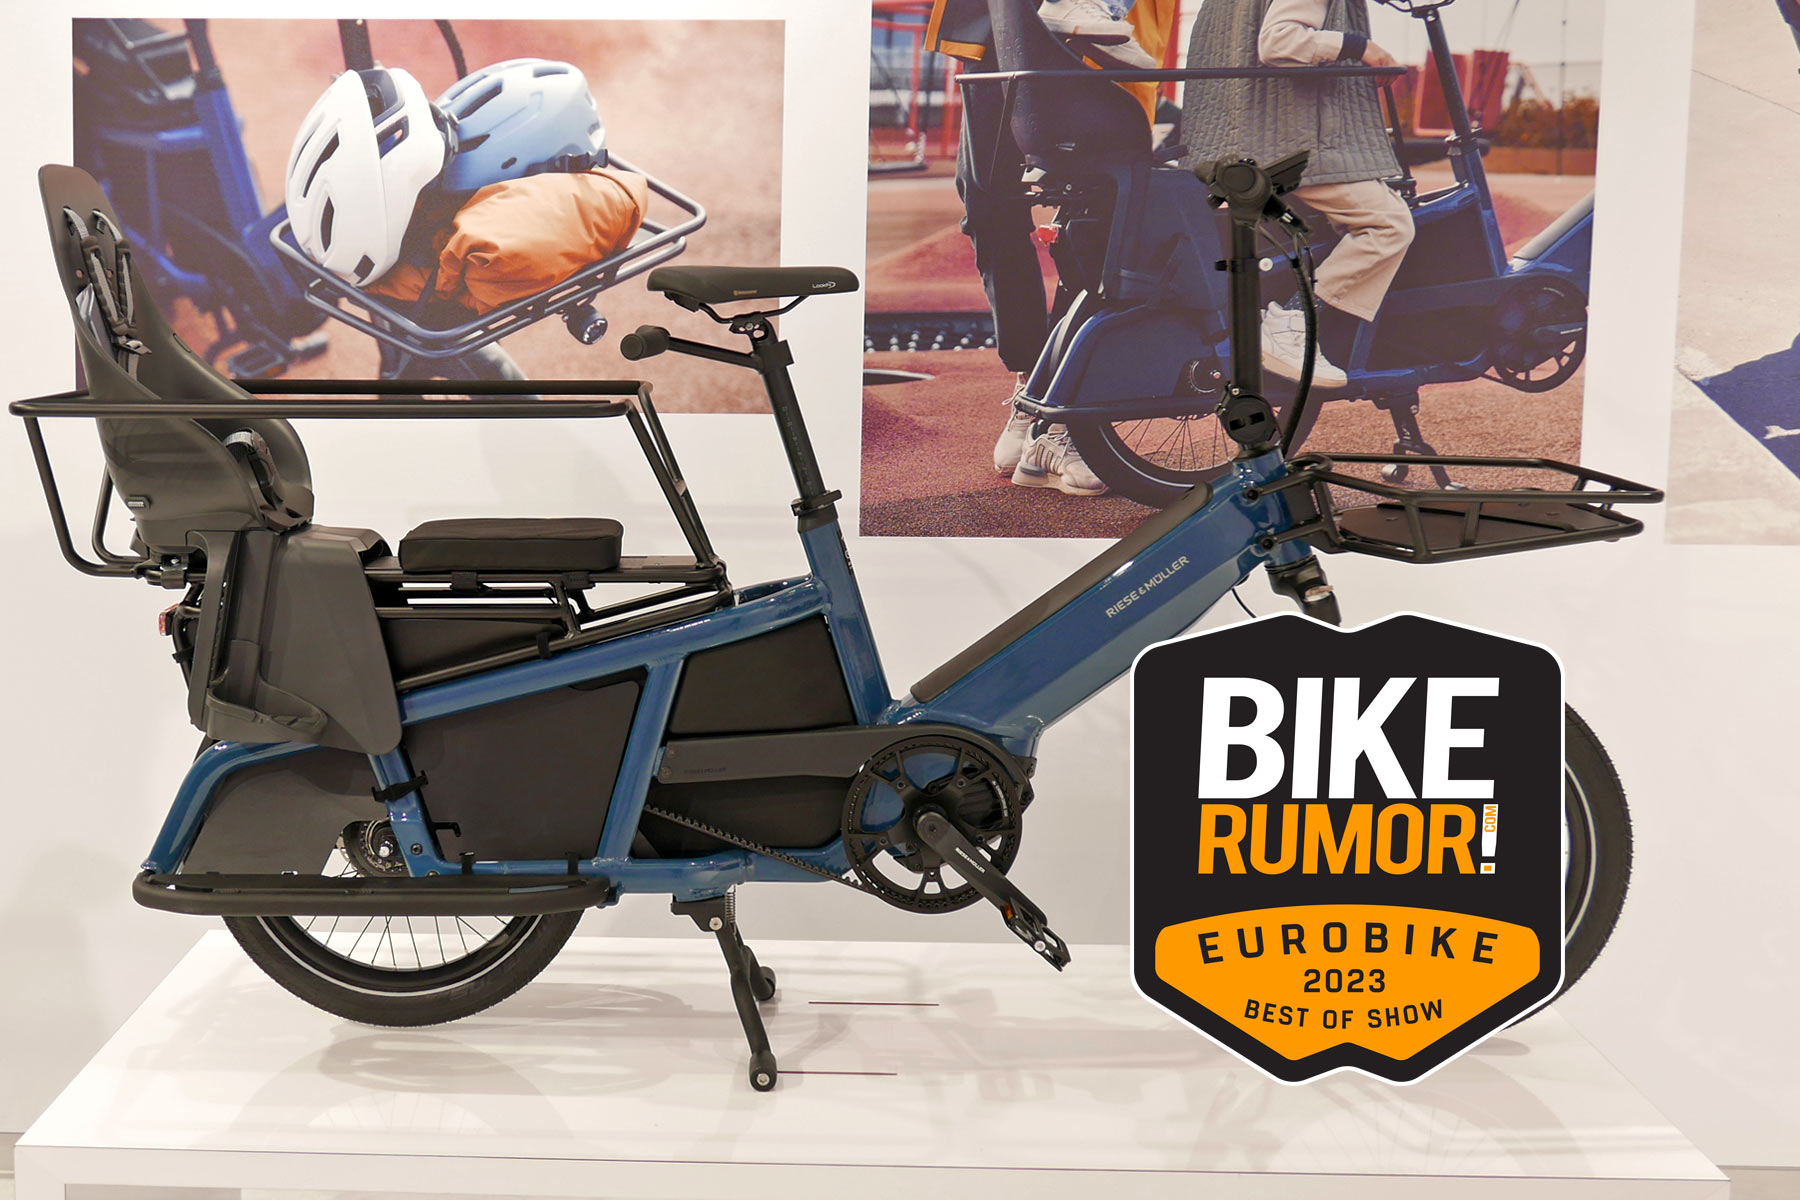 Bikerumor 2023 Eurobike Best Of Show award, best urban cycling - Riese & Muller subscription